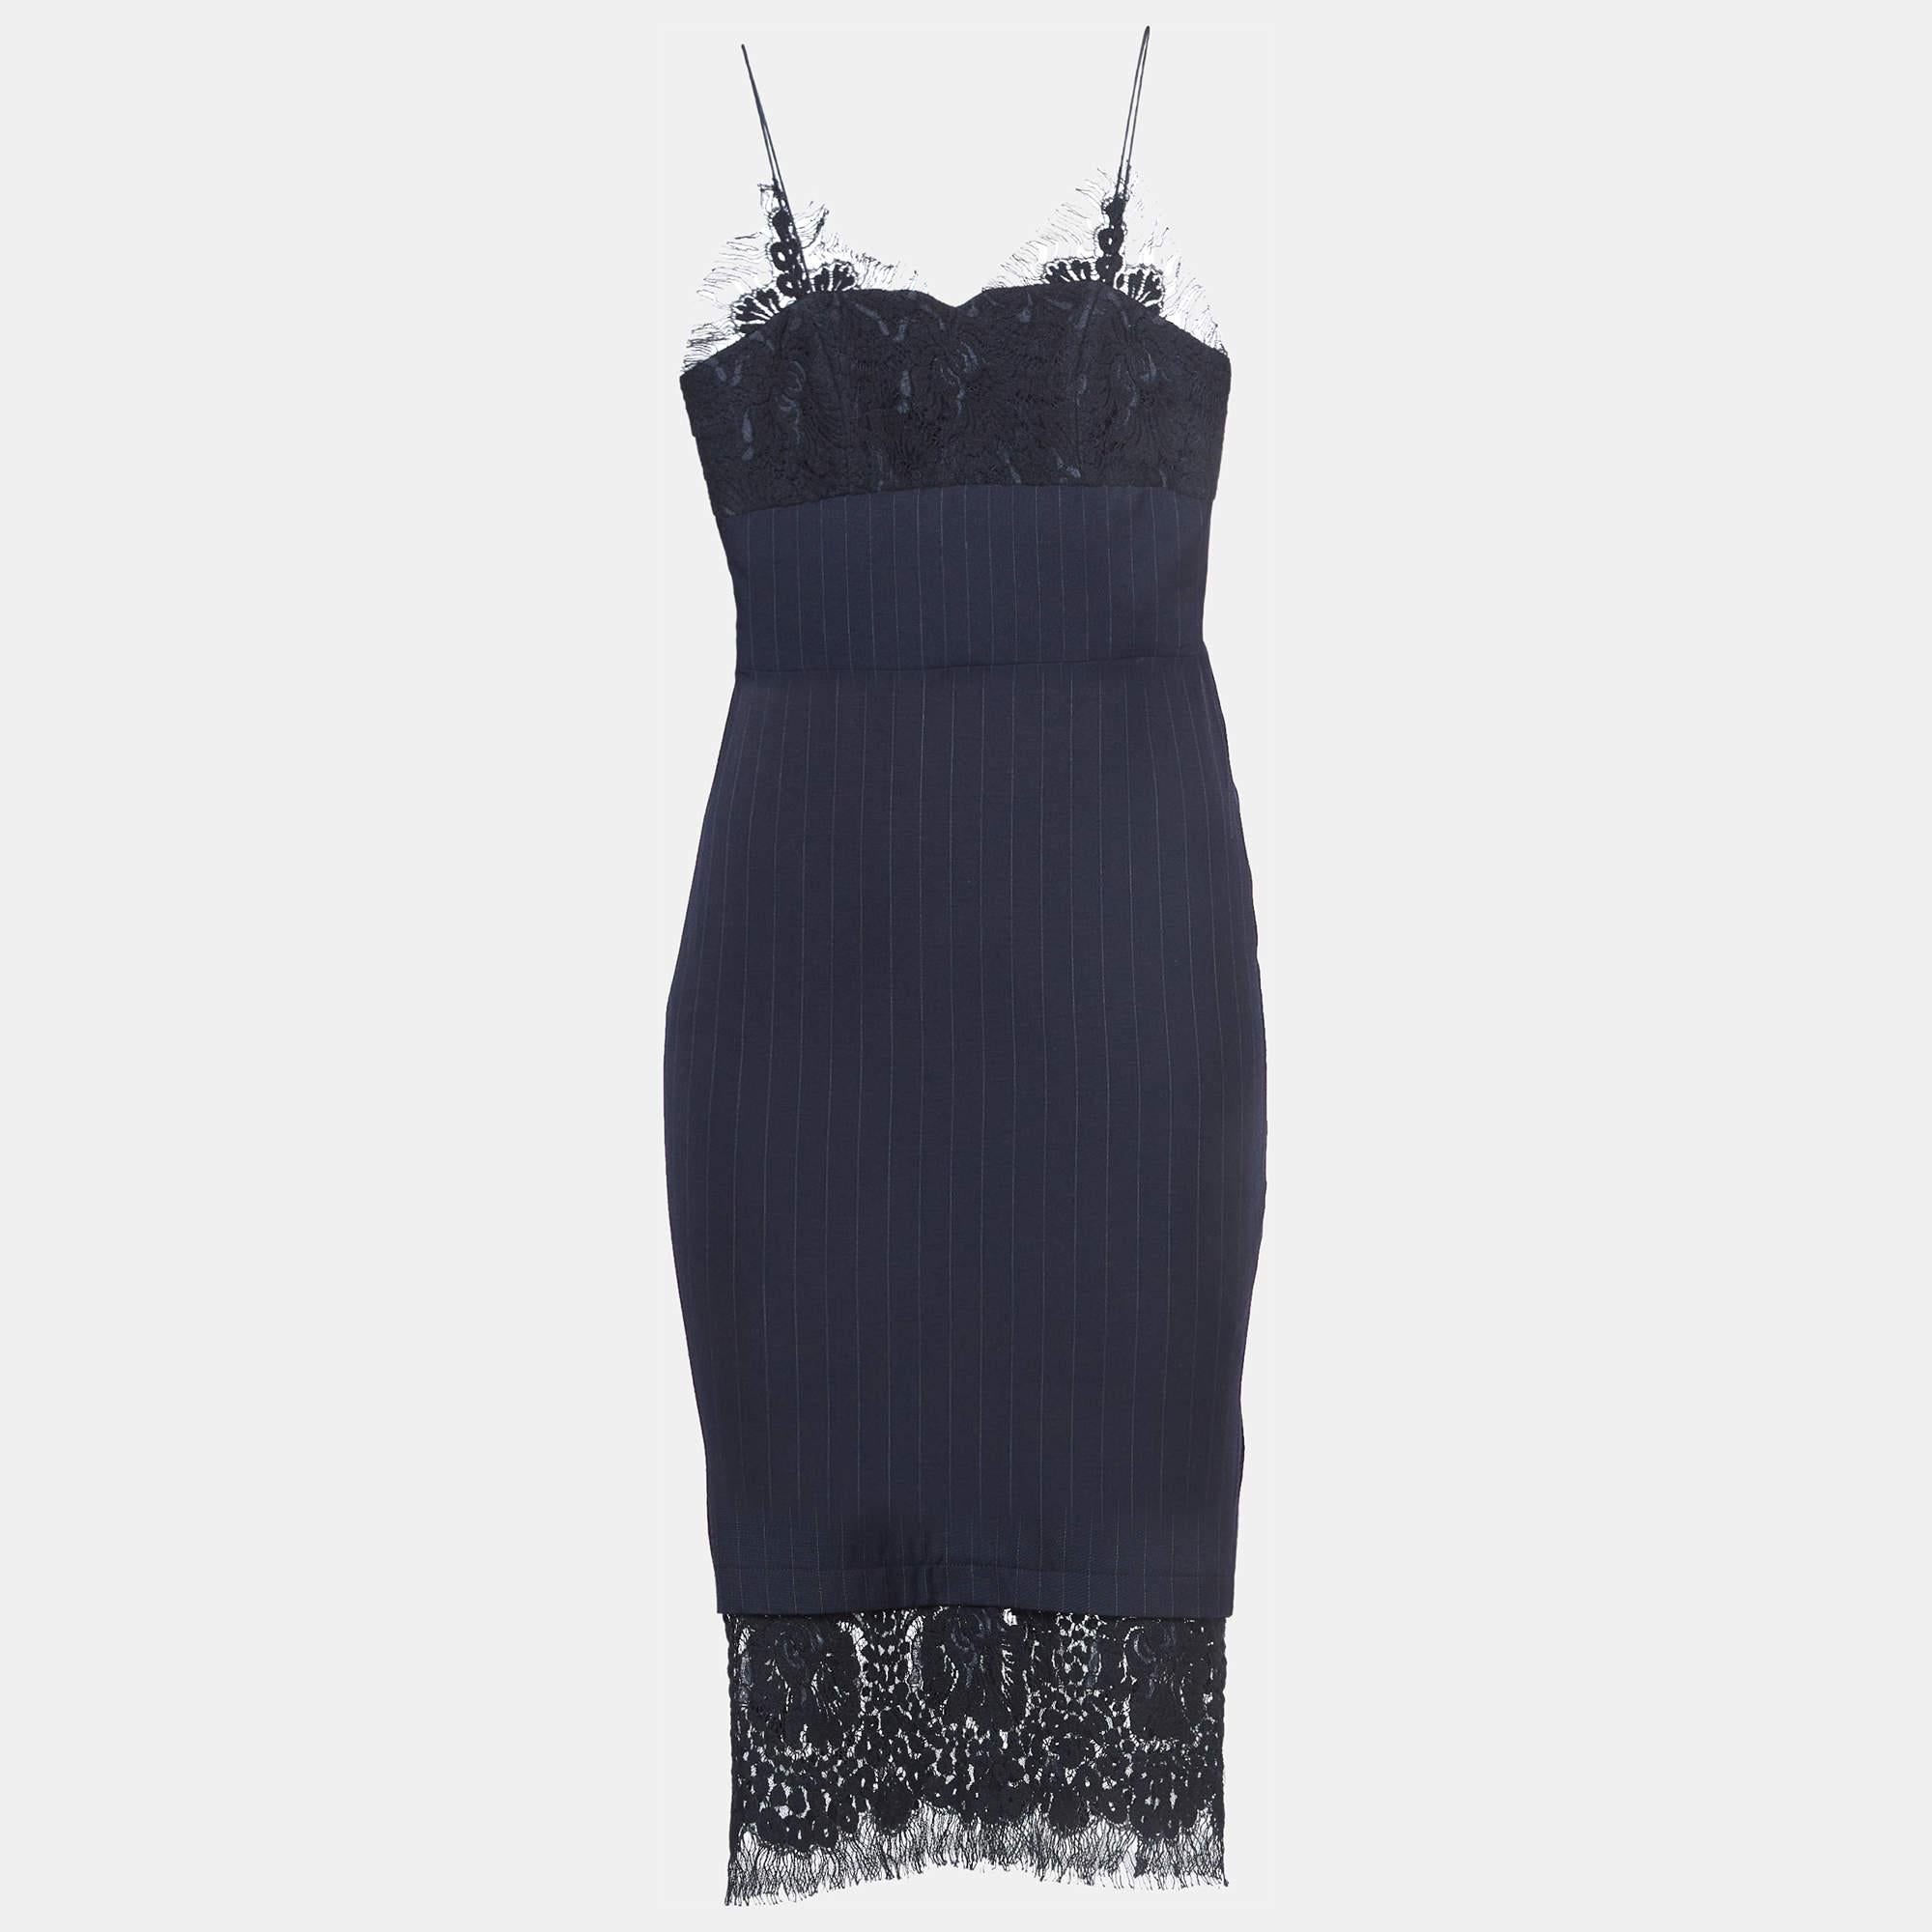 Victoria Beckham Navy Blue Pinstriped Wool Lace-Trimmed Midi Dress S In Good Condition For Sale In Dubai, Al Qouz 2